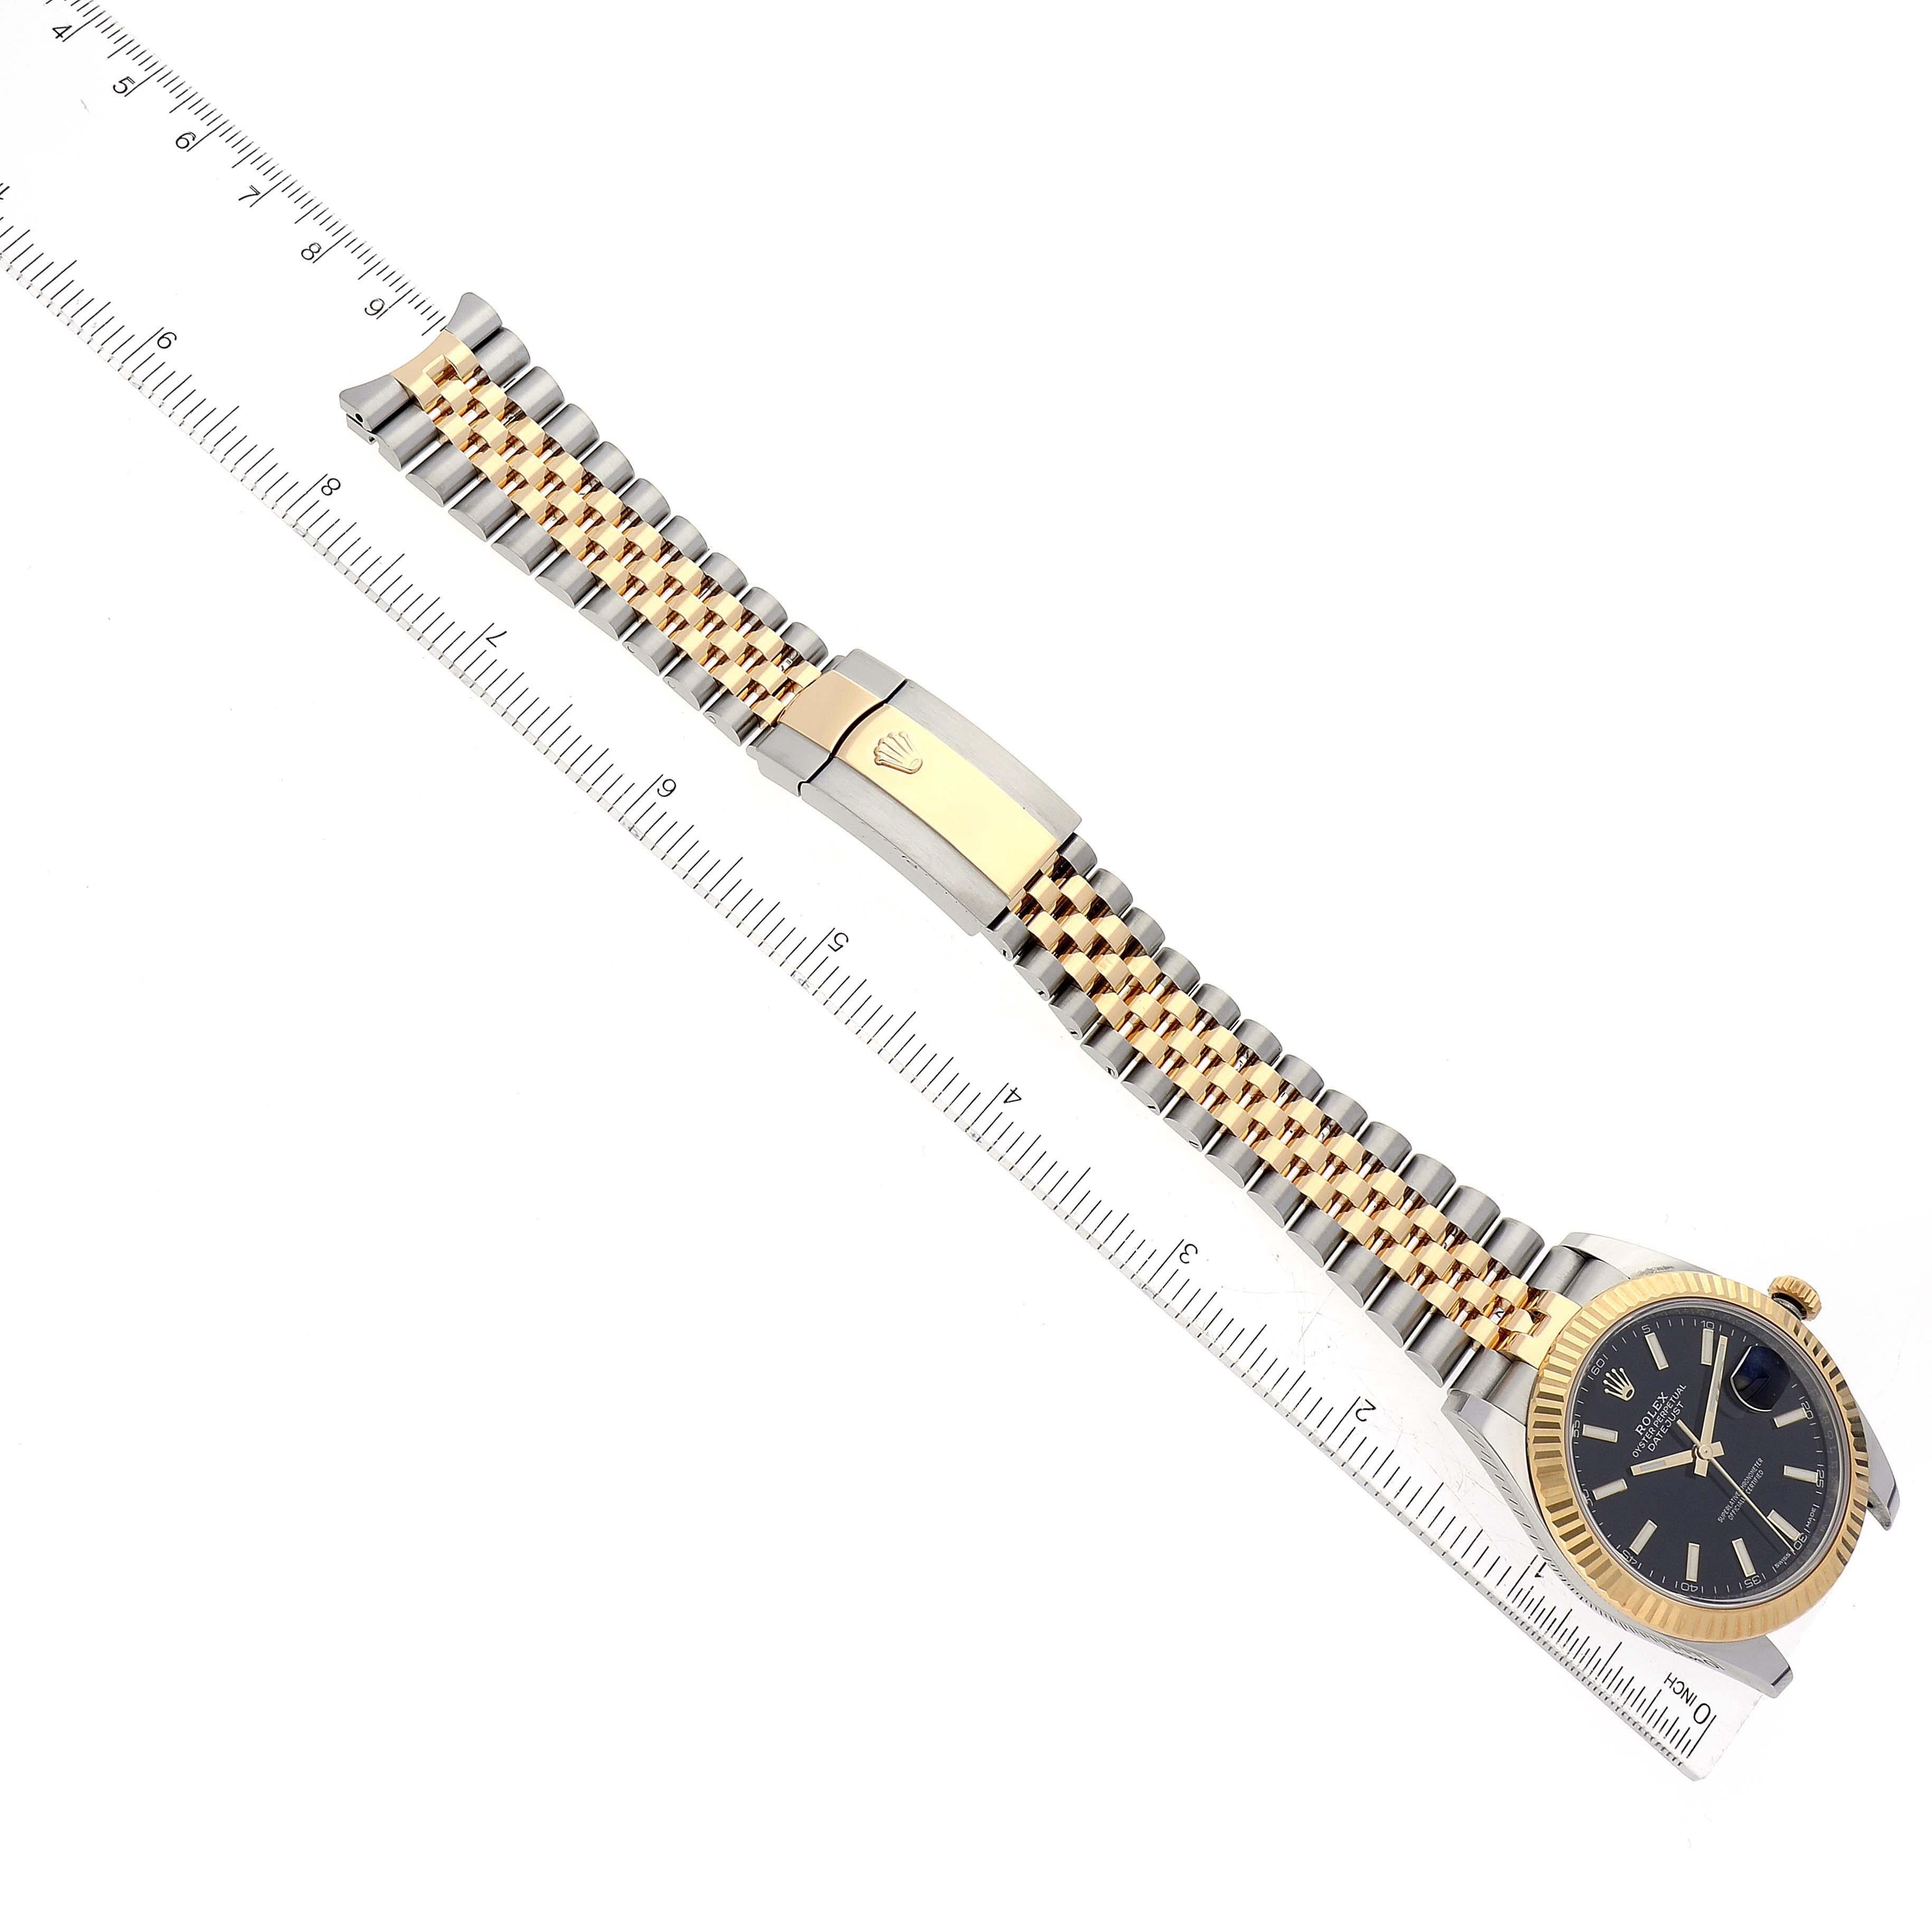 Rolex Datejust 41 Steel Yellow Gold Black Dial Mens Watch 126333 Box Card For Sale 8